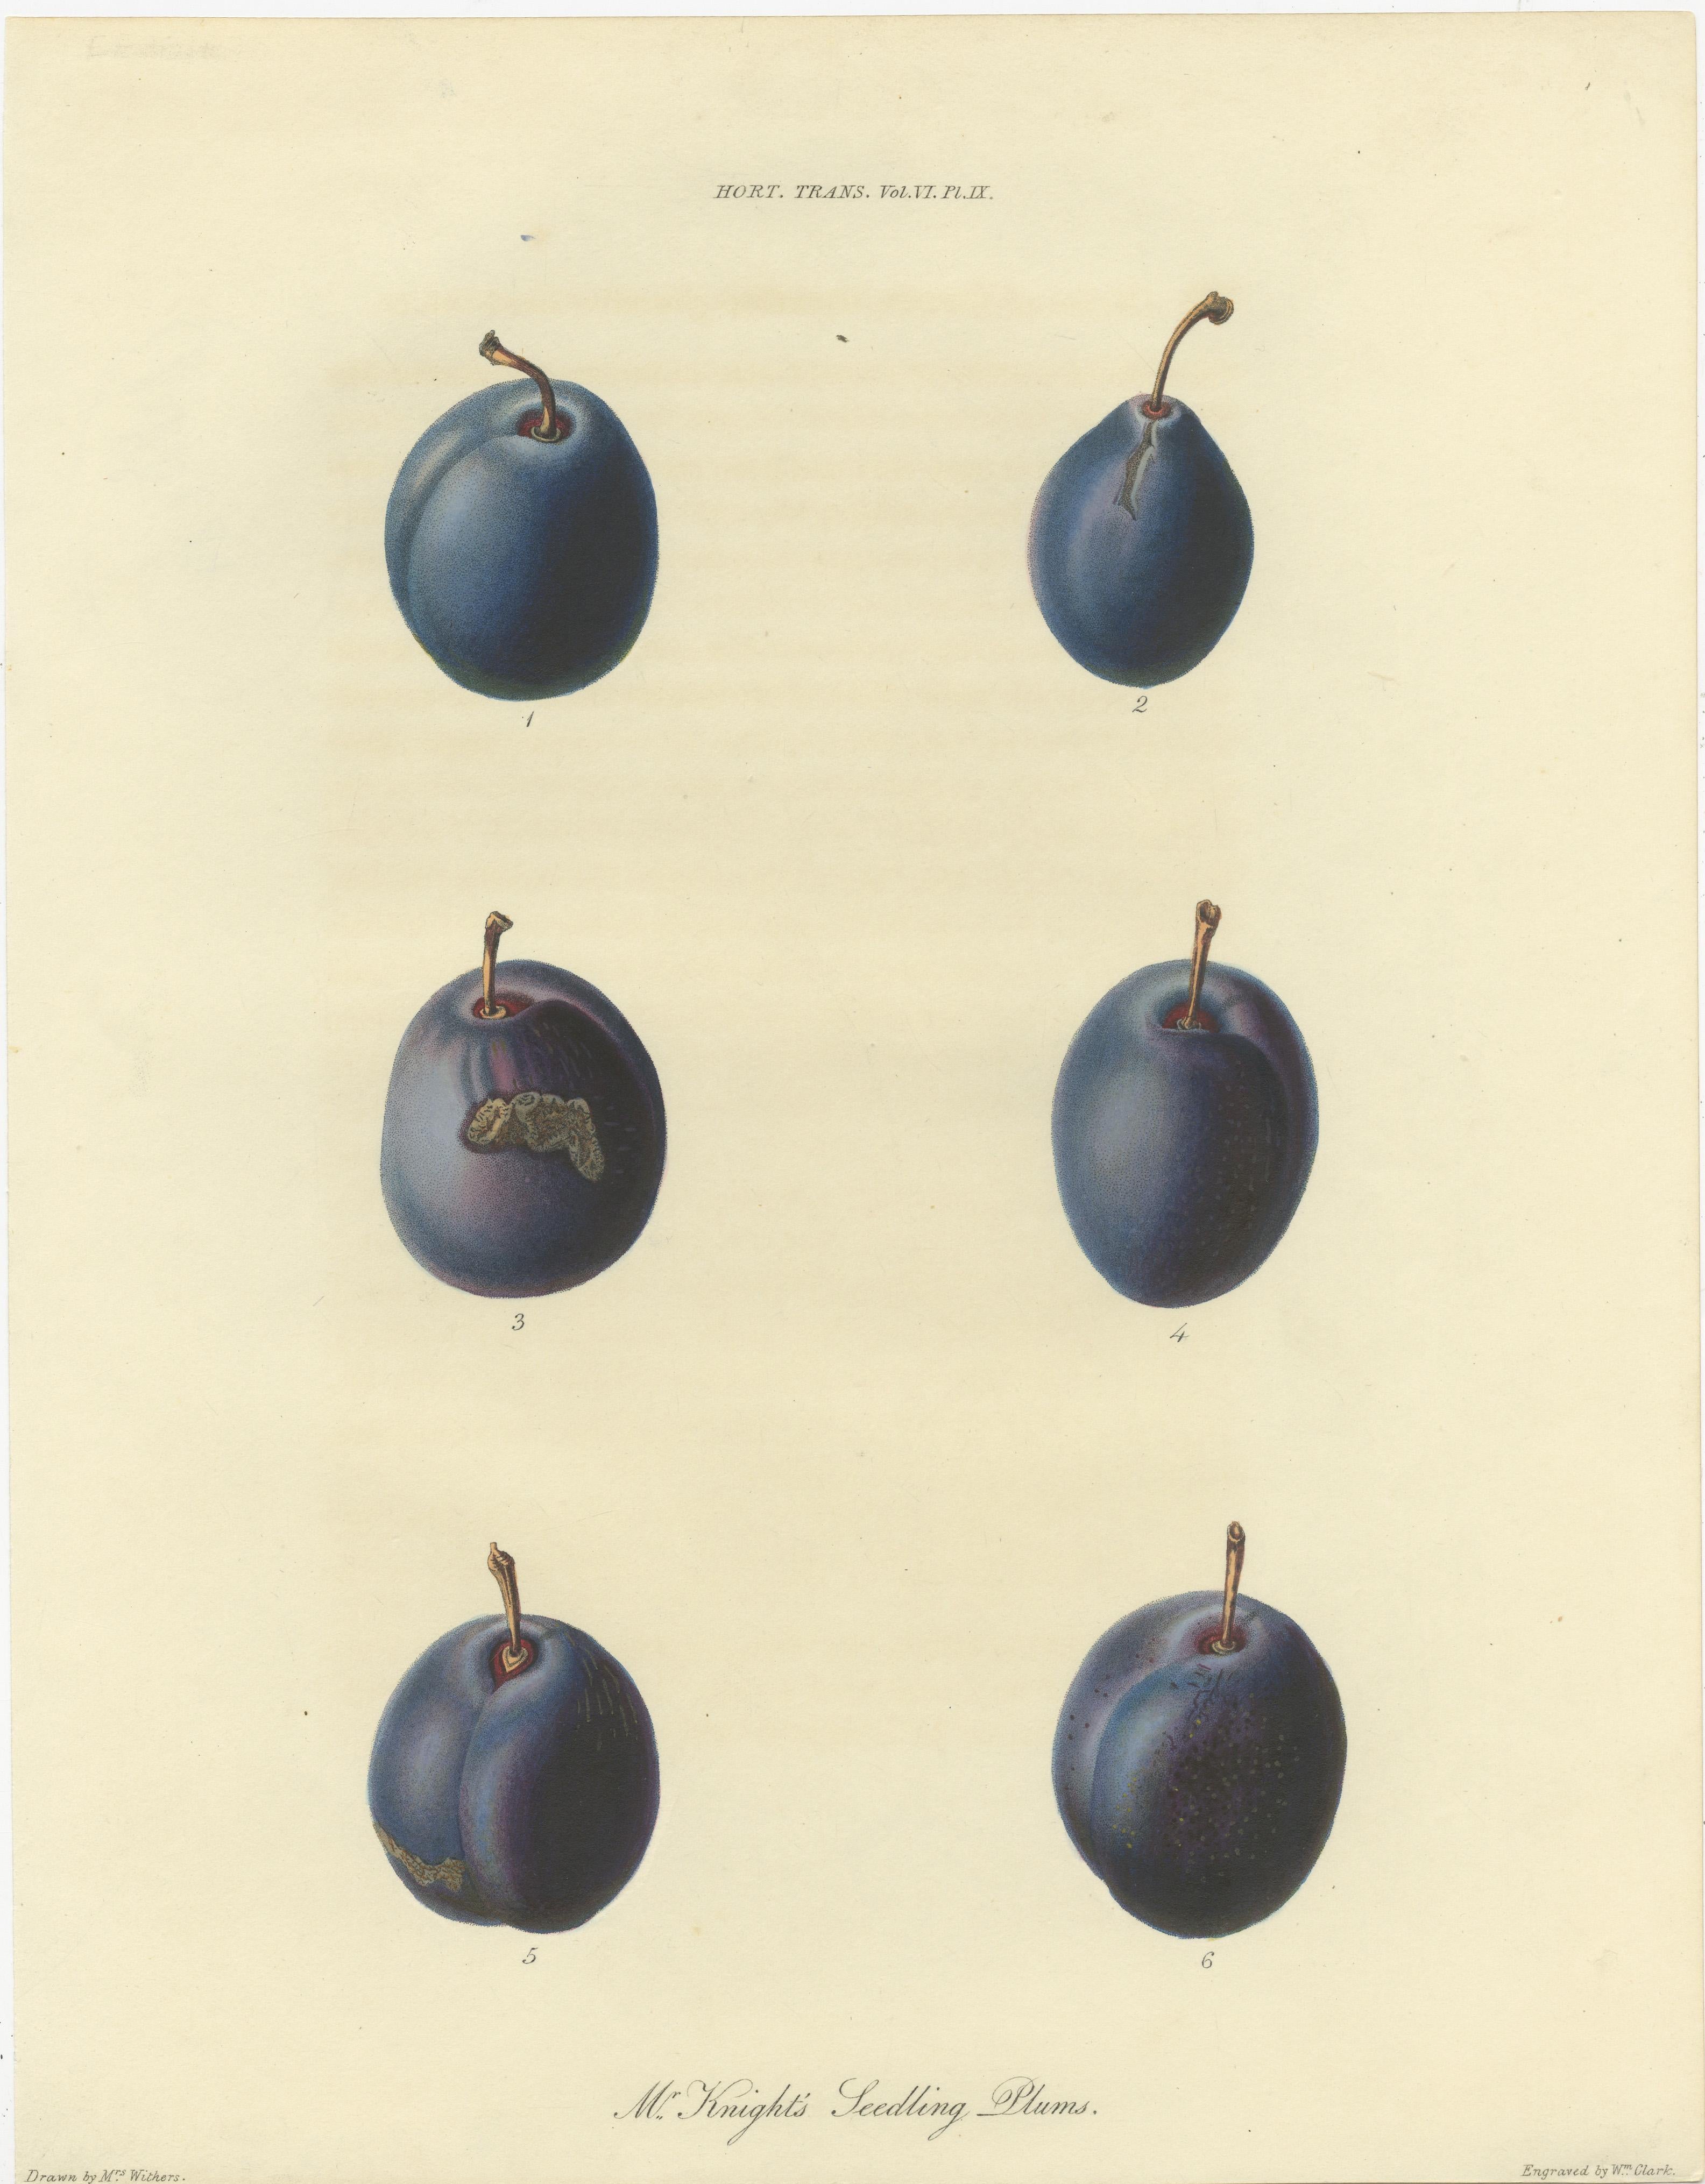 Antique print titled 'Mr. Knight's Seedling Plums'. This print originates from 'Transactions of the Horticultural Society of London' published circa 1835.

In Transactions of the Horticultural Society of London we find some of the most beautifully